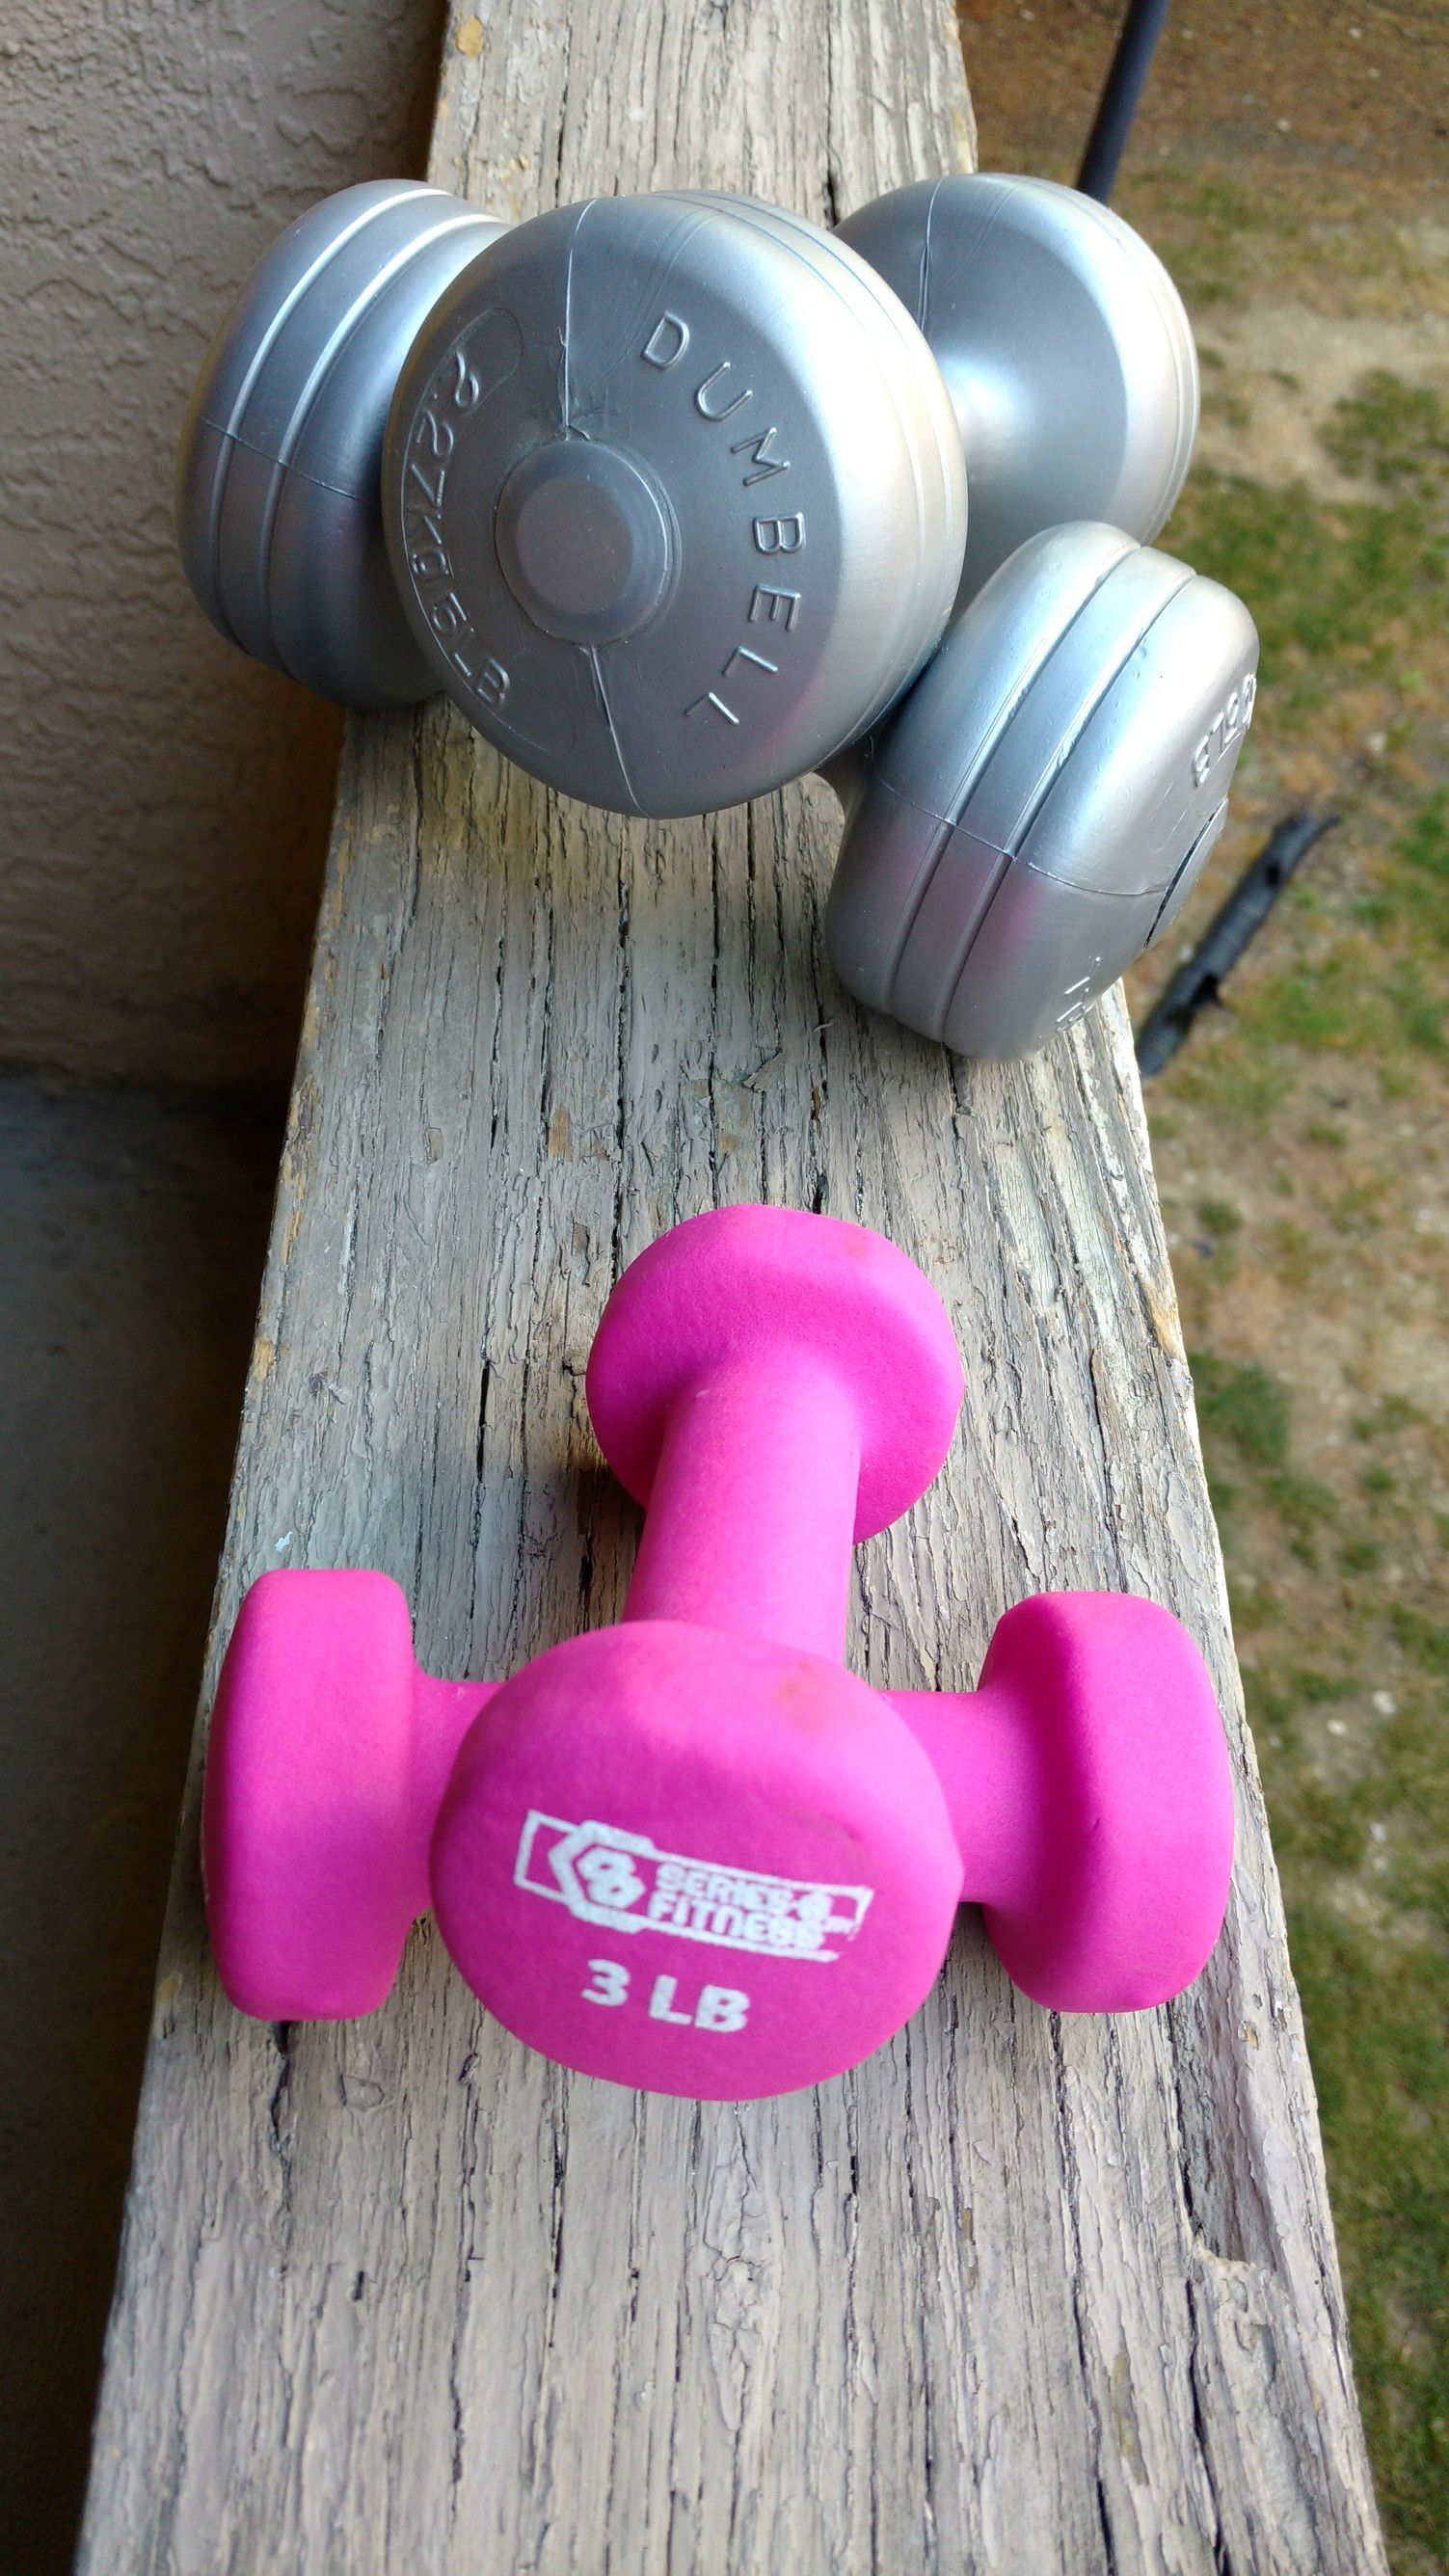 5 lb in 3 lb pink and gray dumbbell set Price Reduced